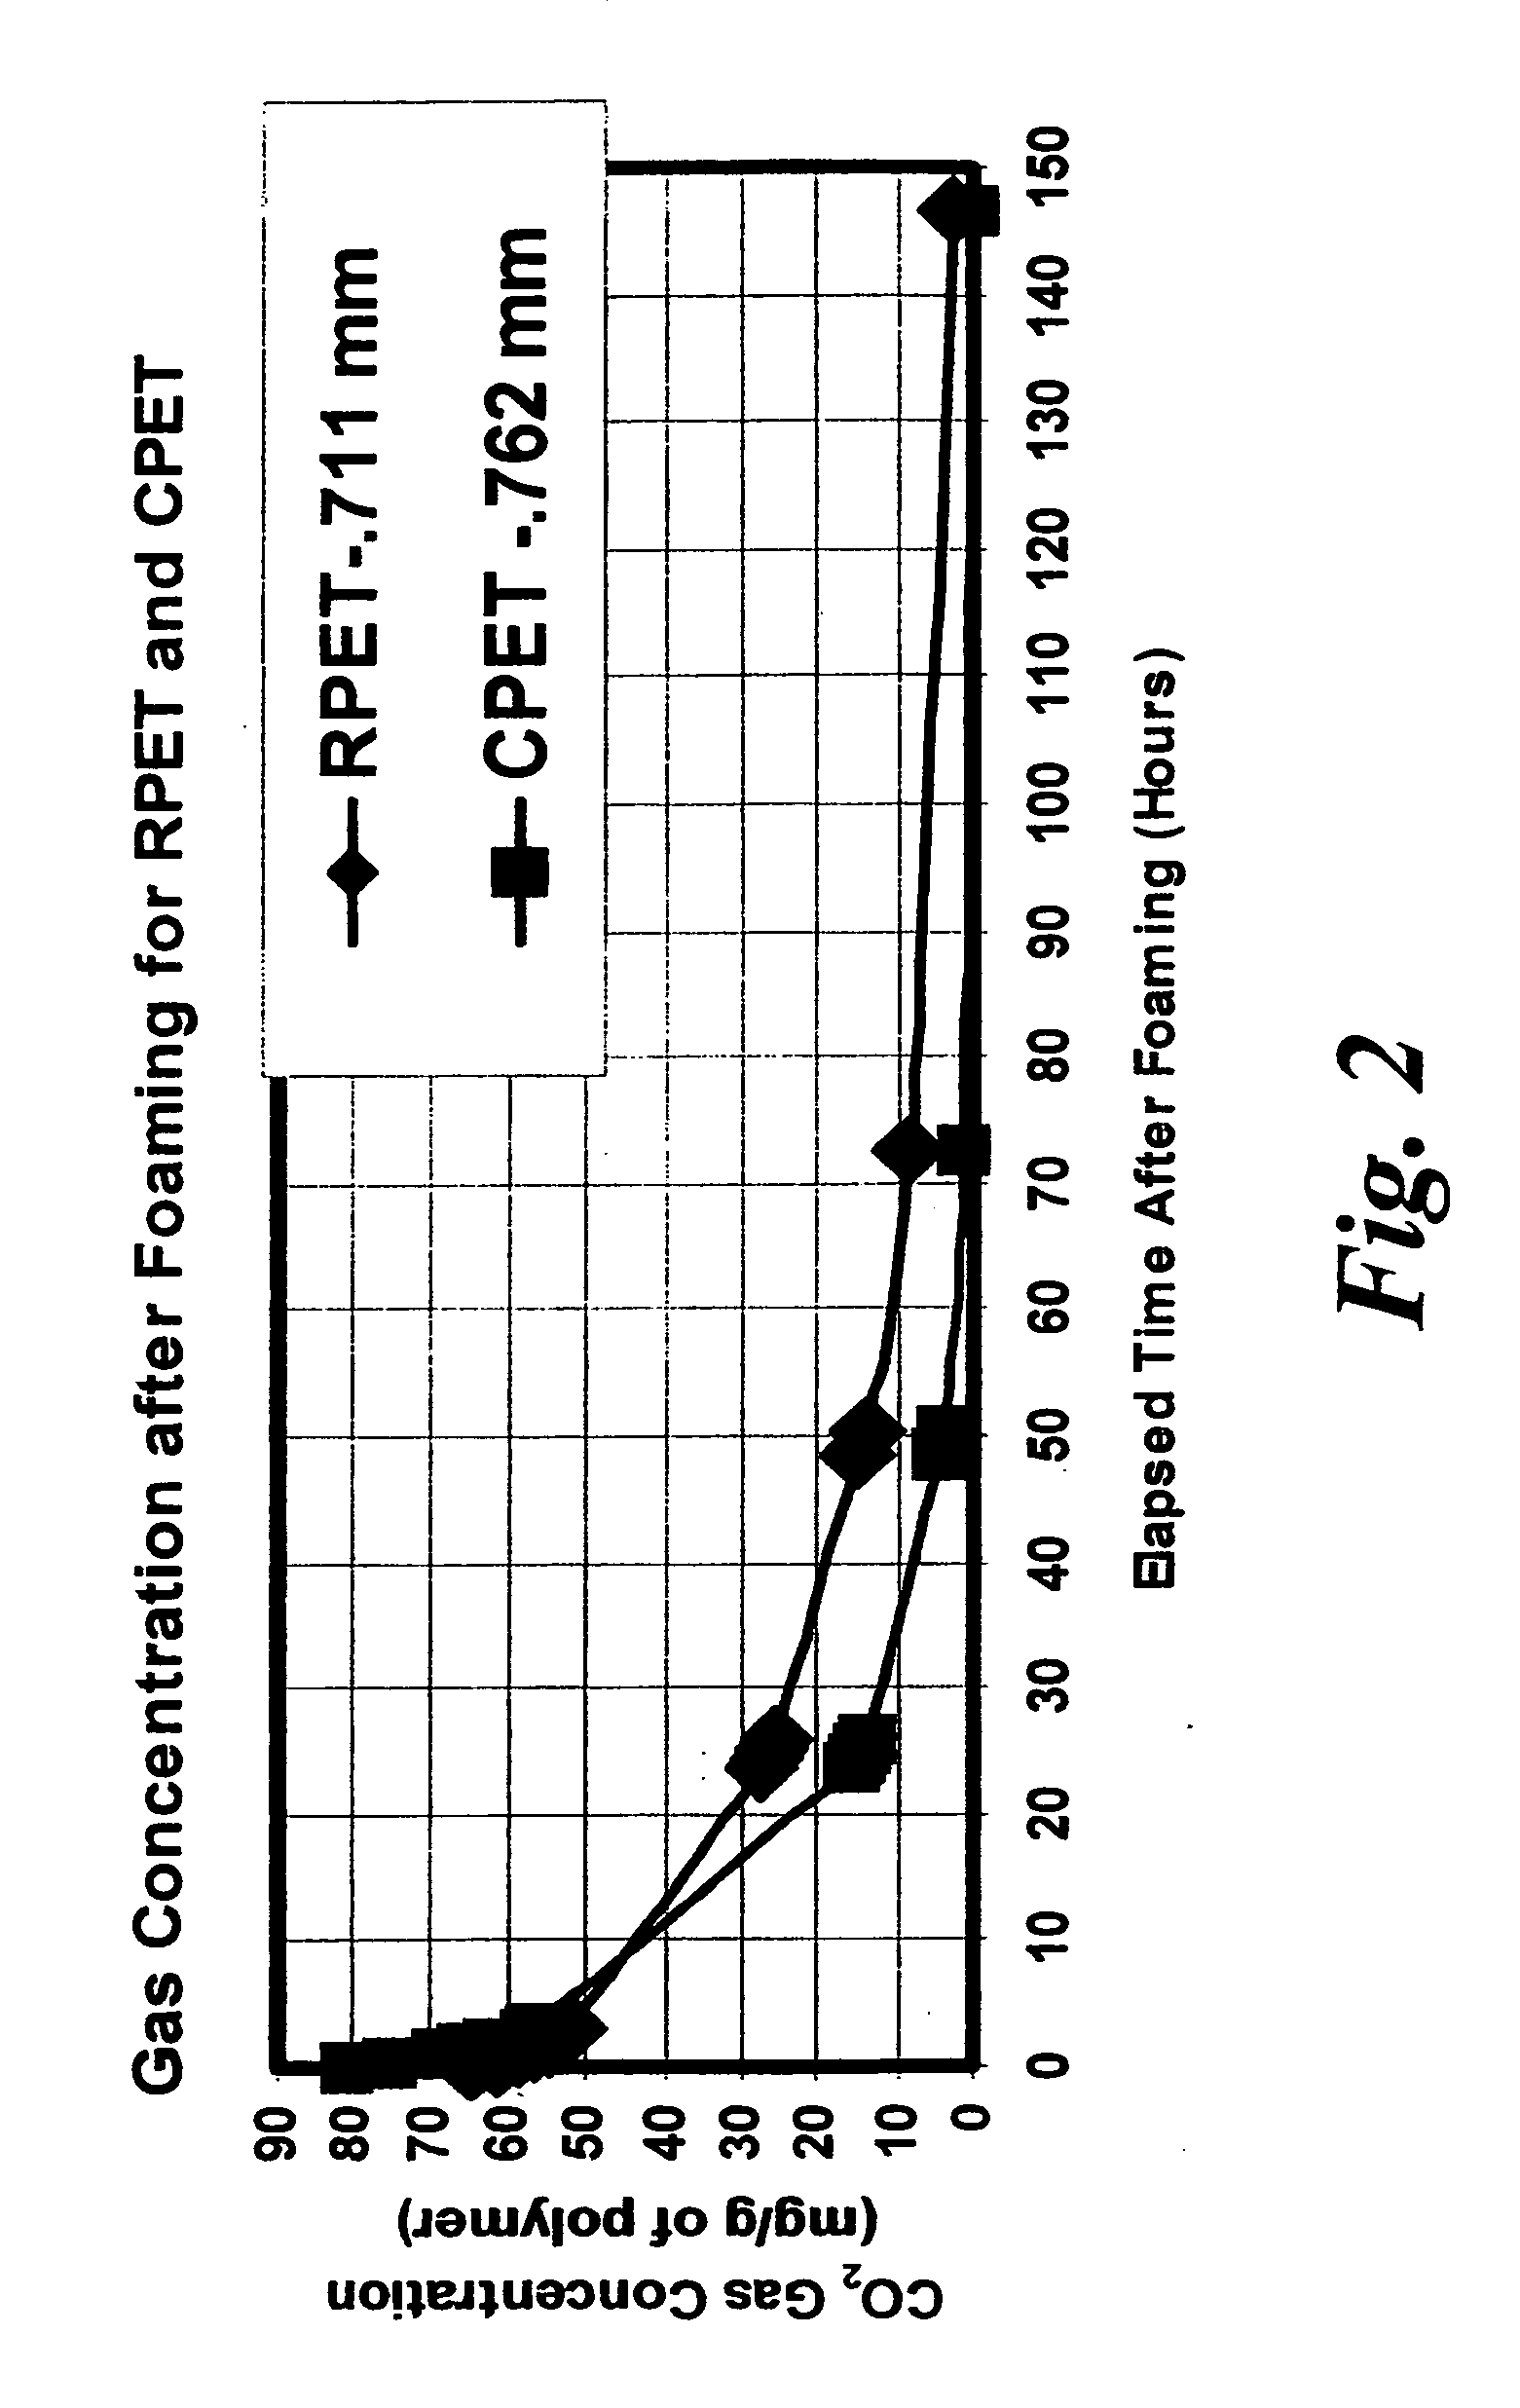 Method of producing thermoformed articles from gas impregnated polymer